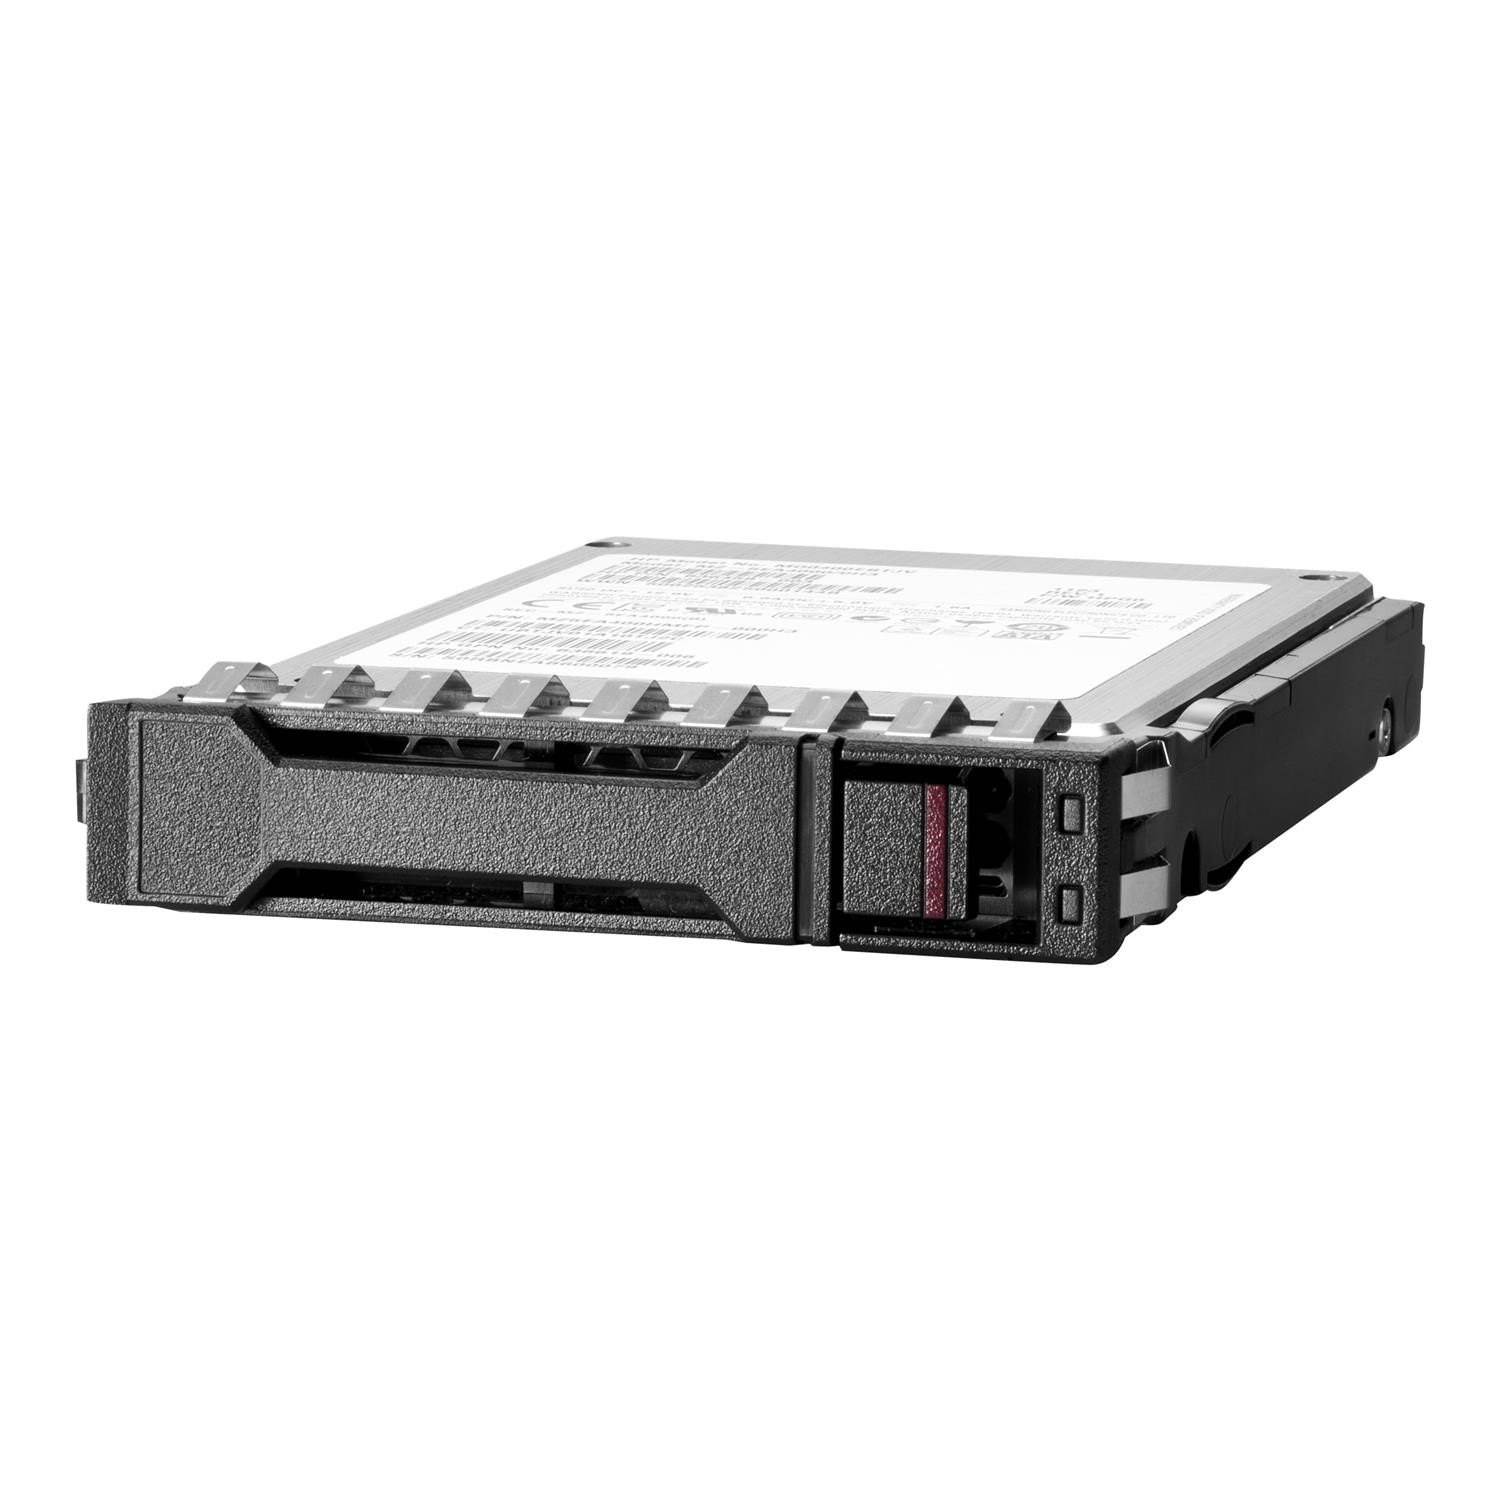 HPE Mission Critical - Hard drive - 300 GB - hot-swap - 2.5 SFF - SAS 12Gb/s - 15000 rpm - with HPE Basic Carrier